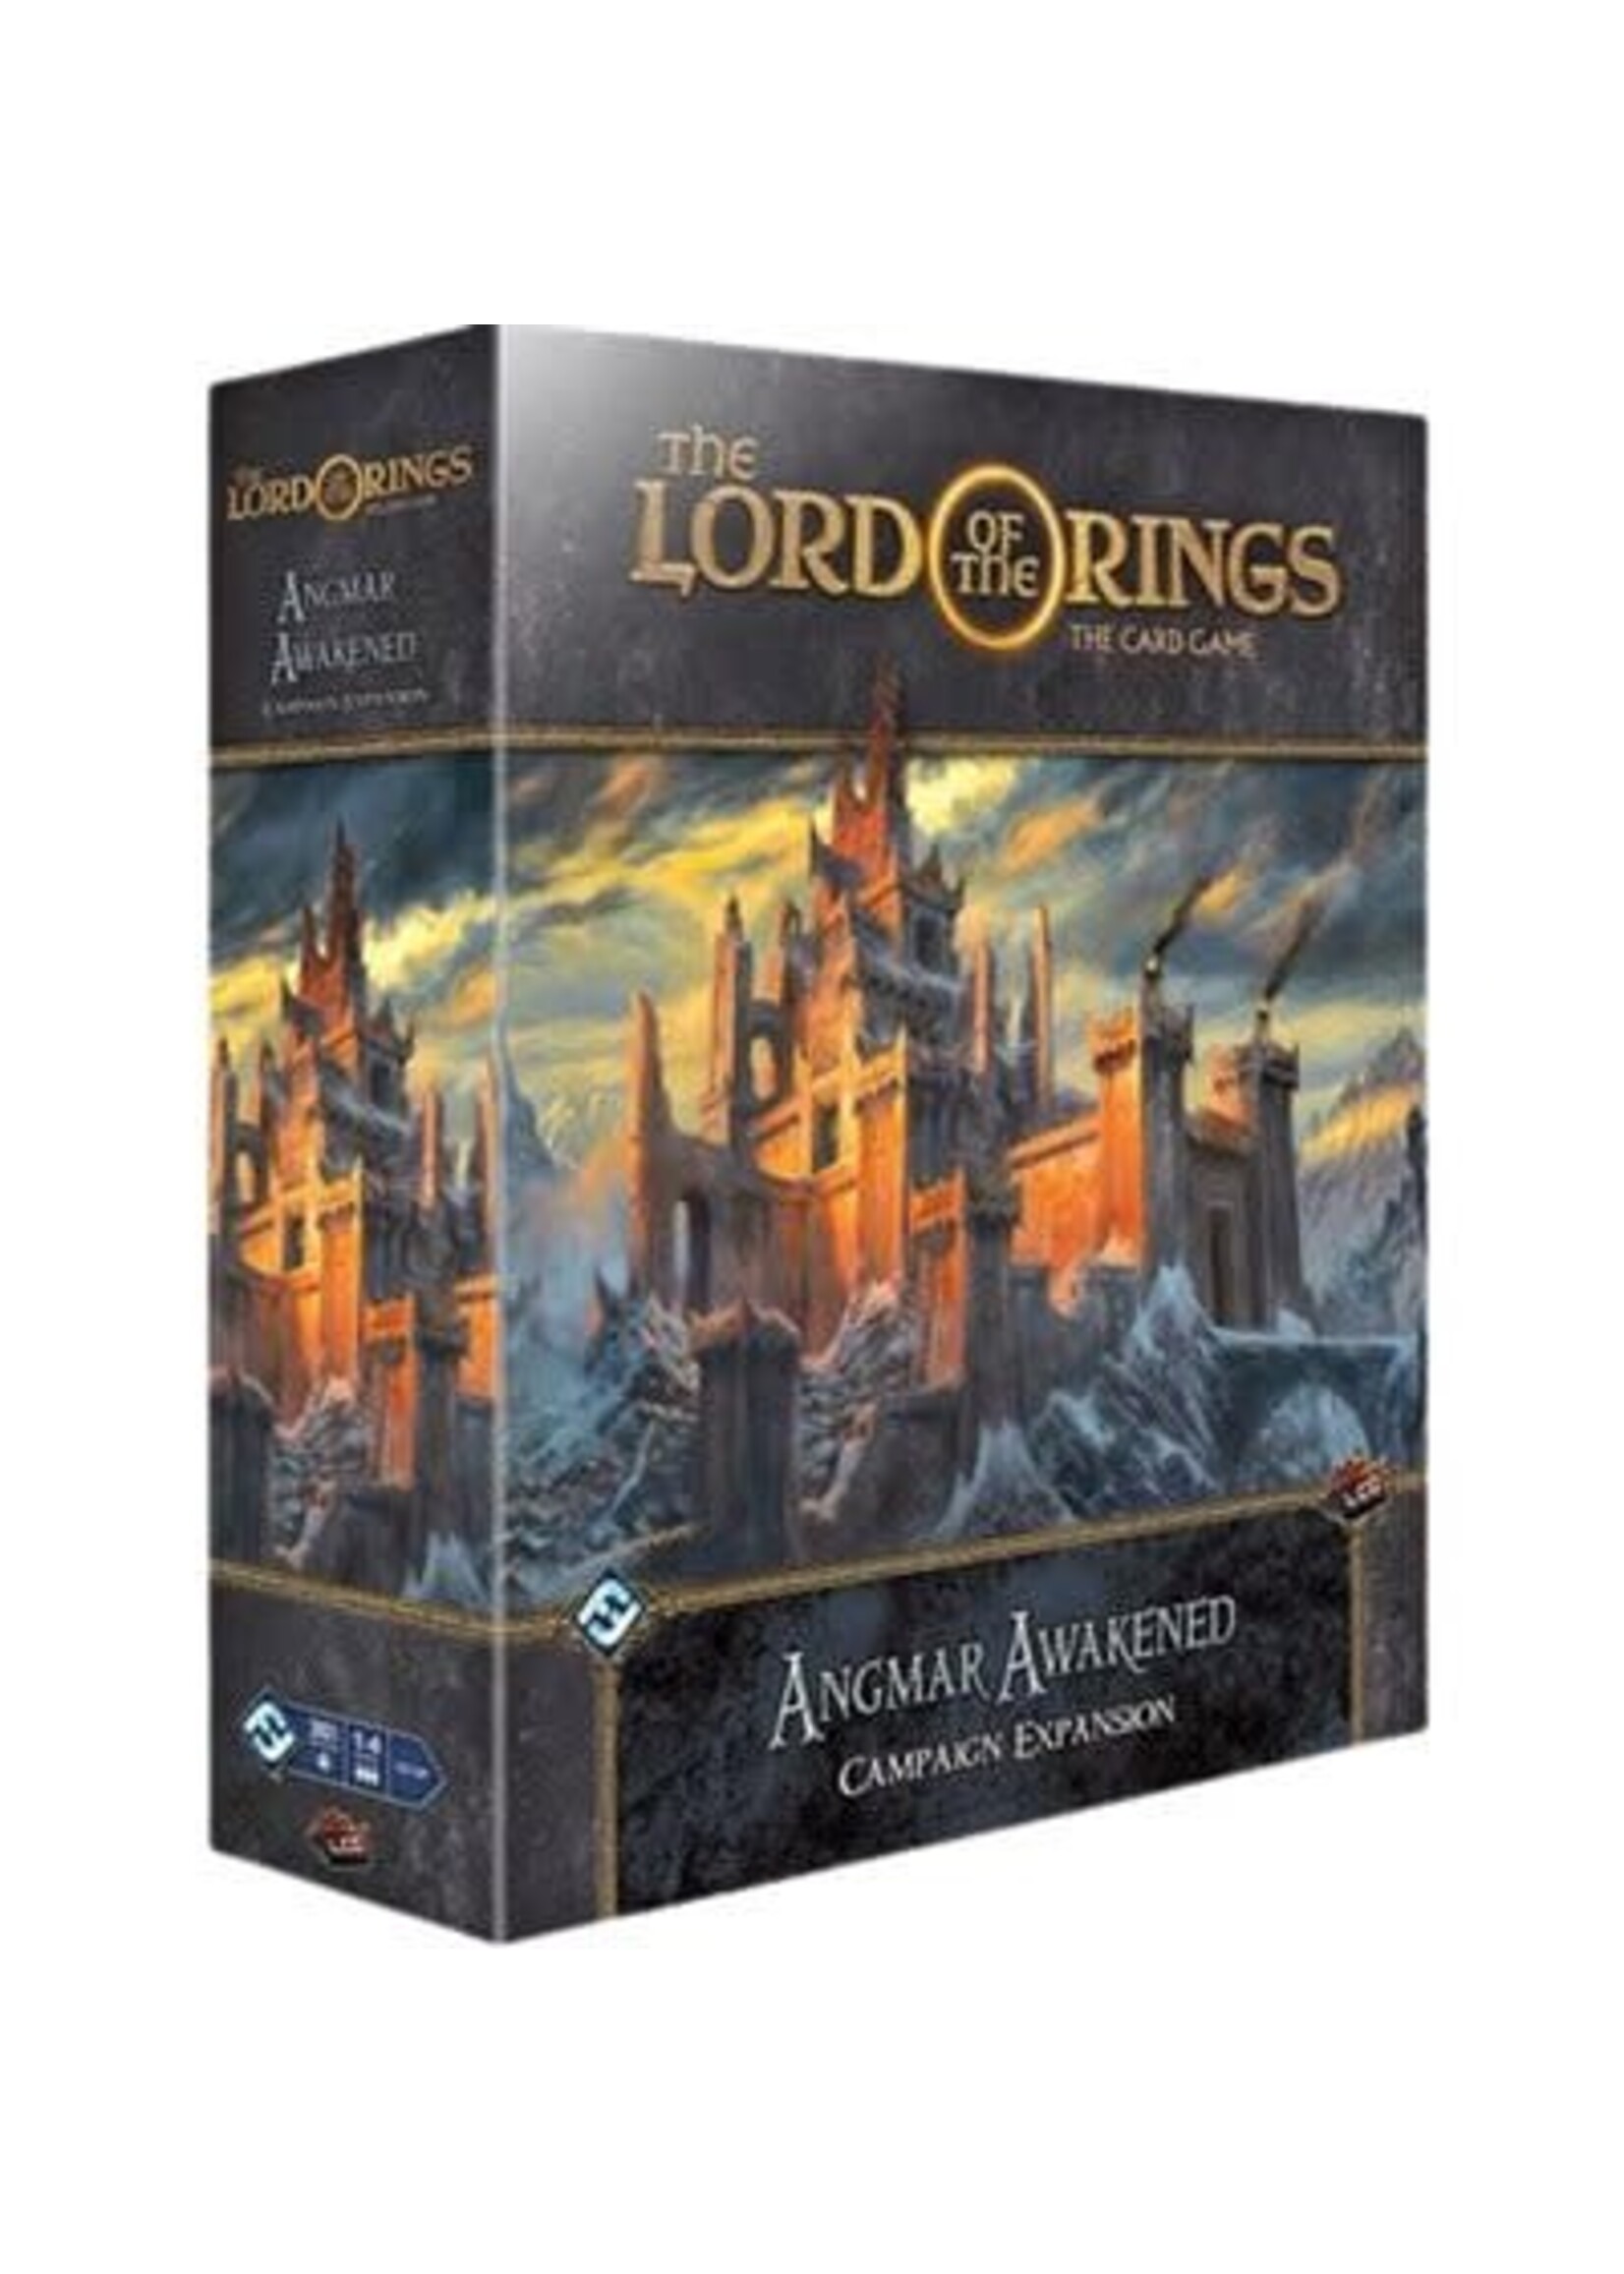 FFG Angmar Awakened Campaign Expansion (ENG) - The Lord of the Rings: The Card Game